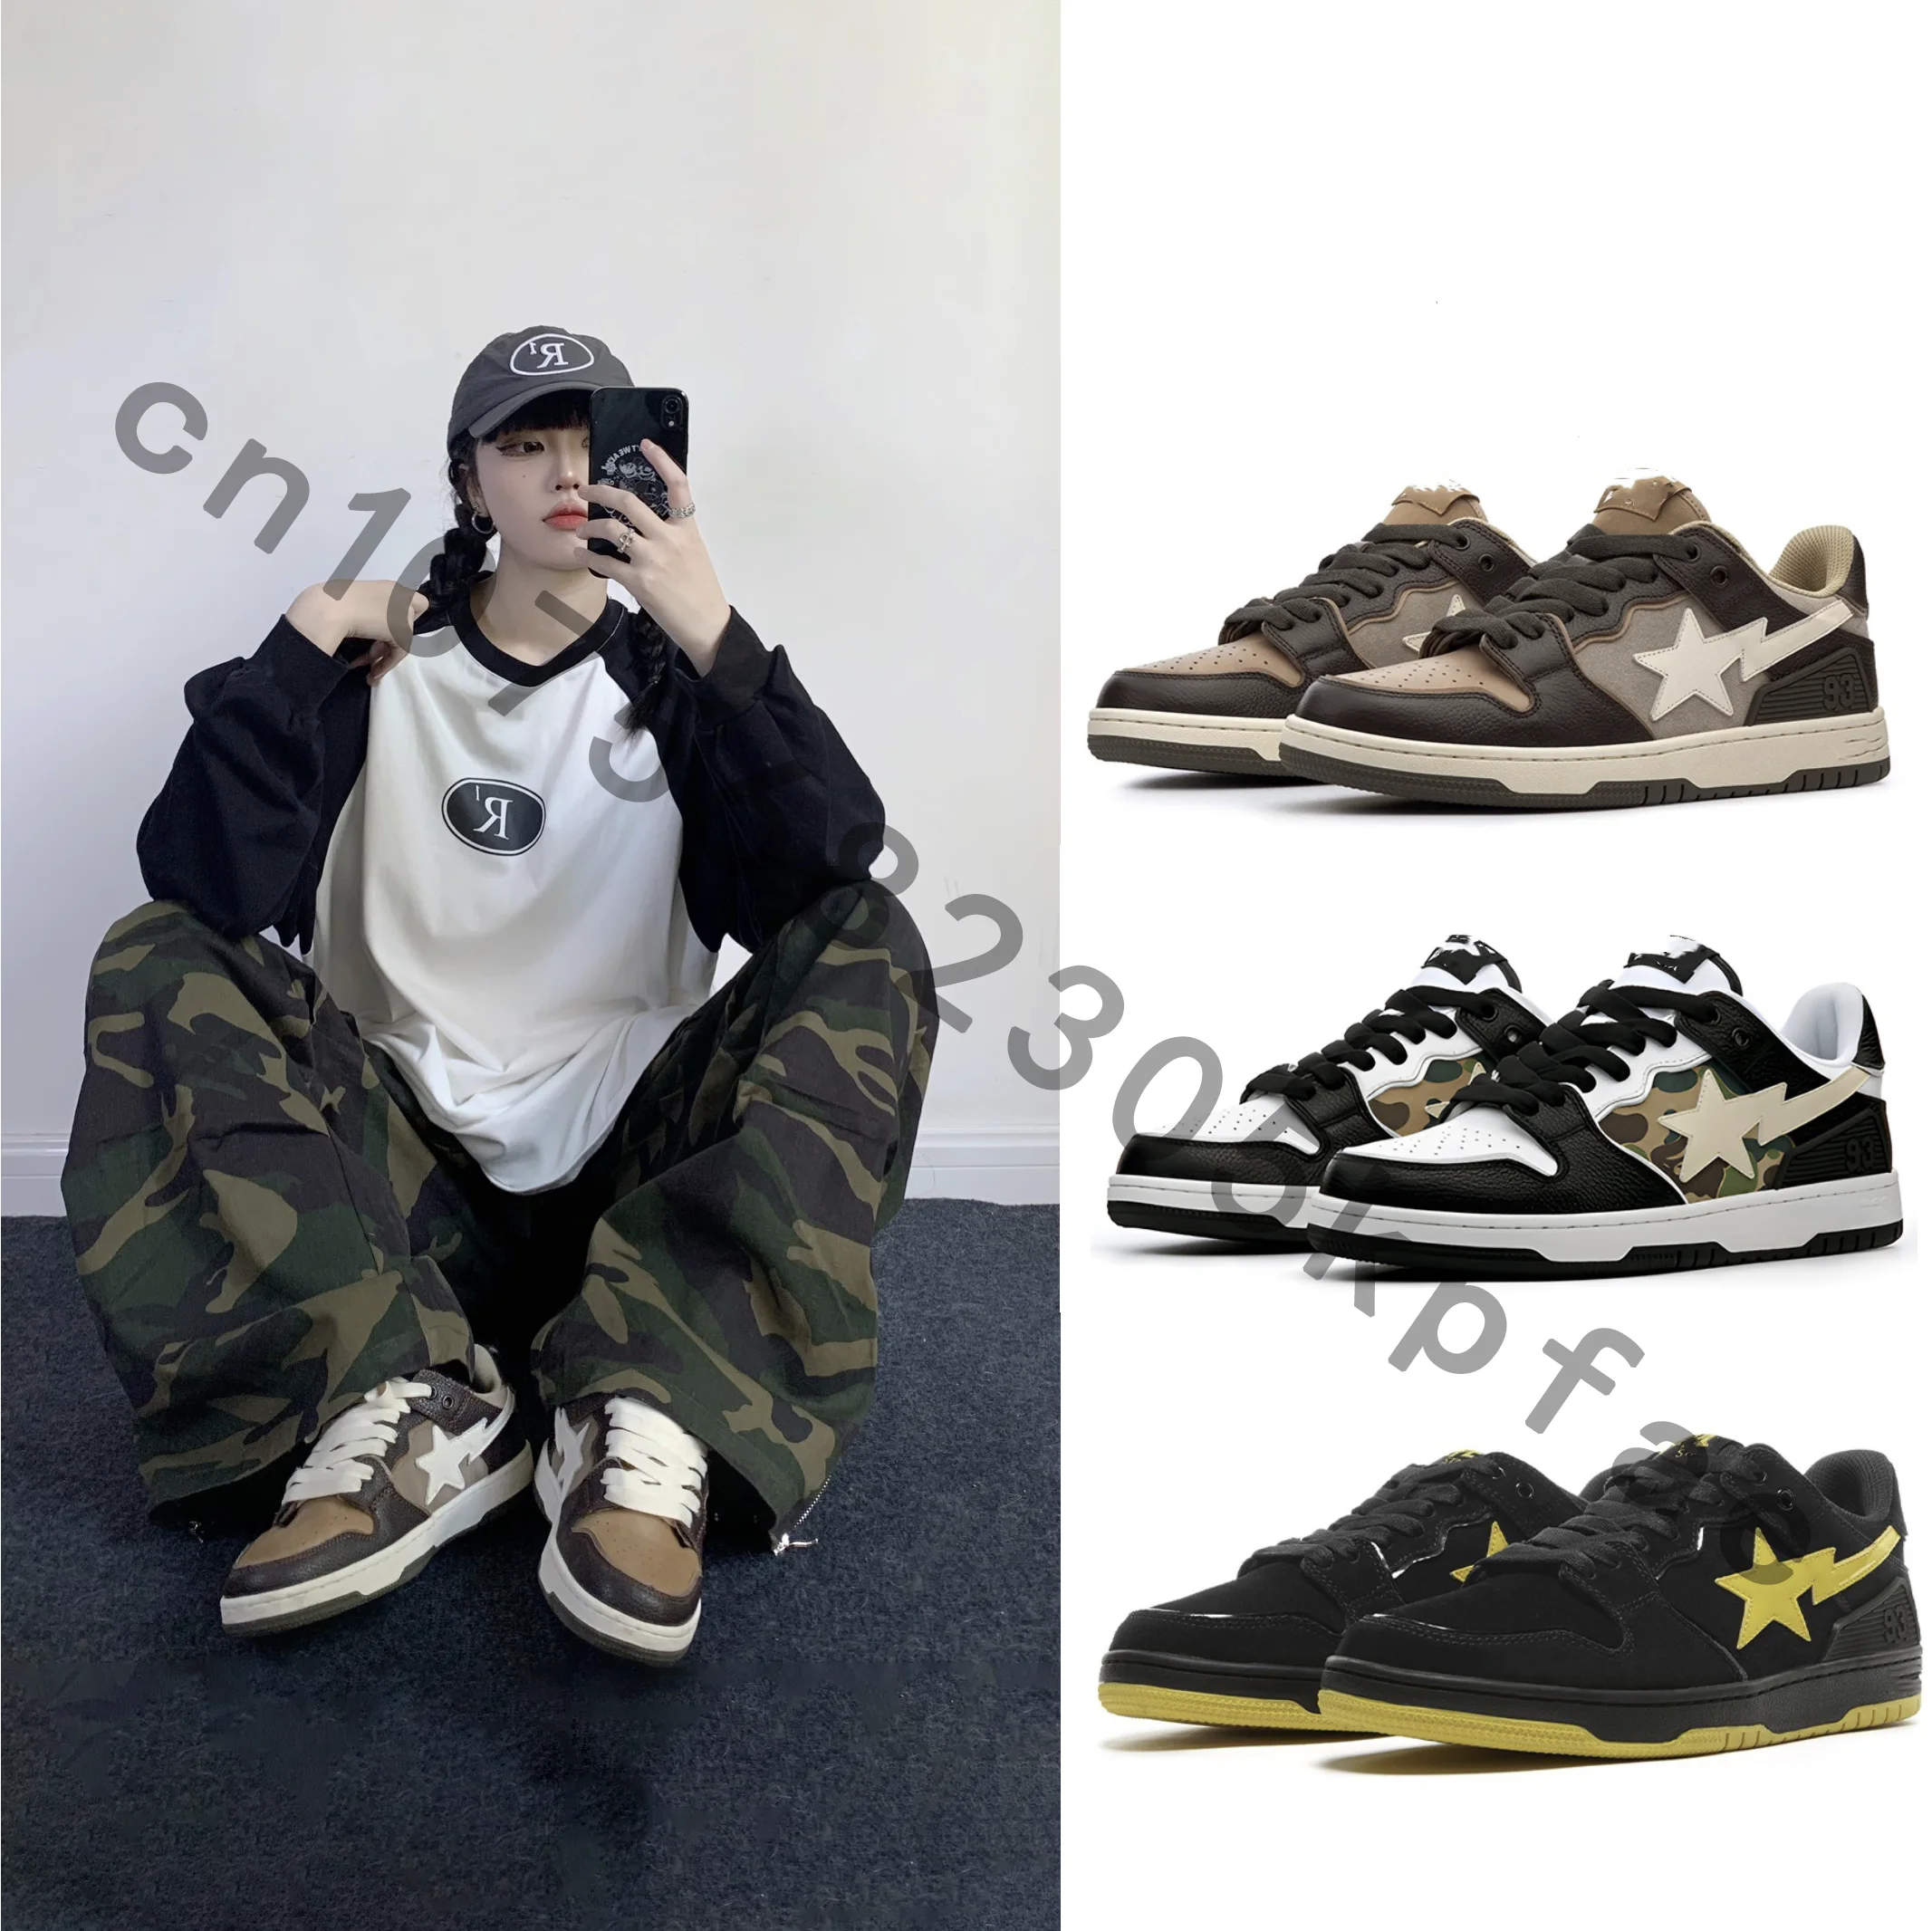 

2023 Bapesta Classic Sneakers Neutral Fashion Patent Leather Luxury Sneaker Outdoor Trainers Plate-forme Designer Shoes